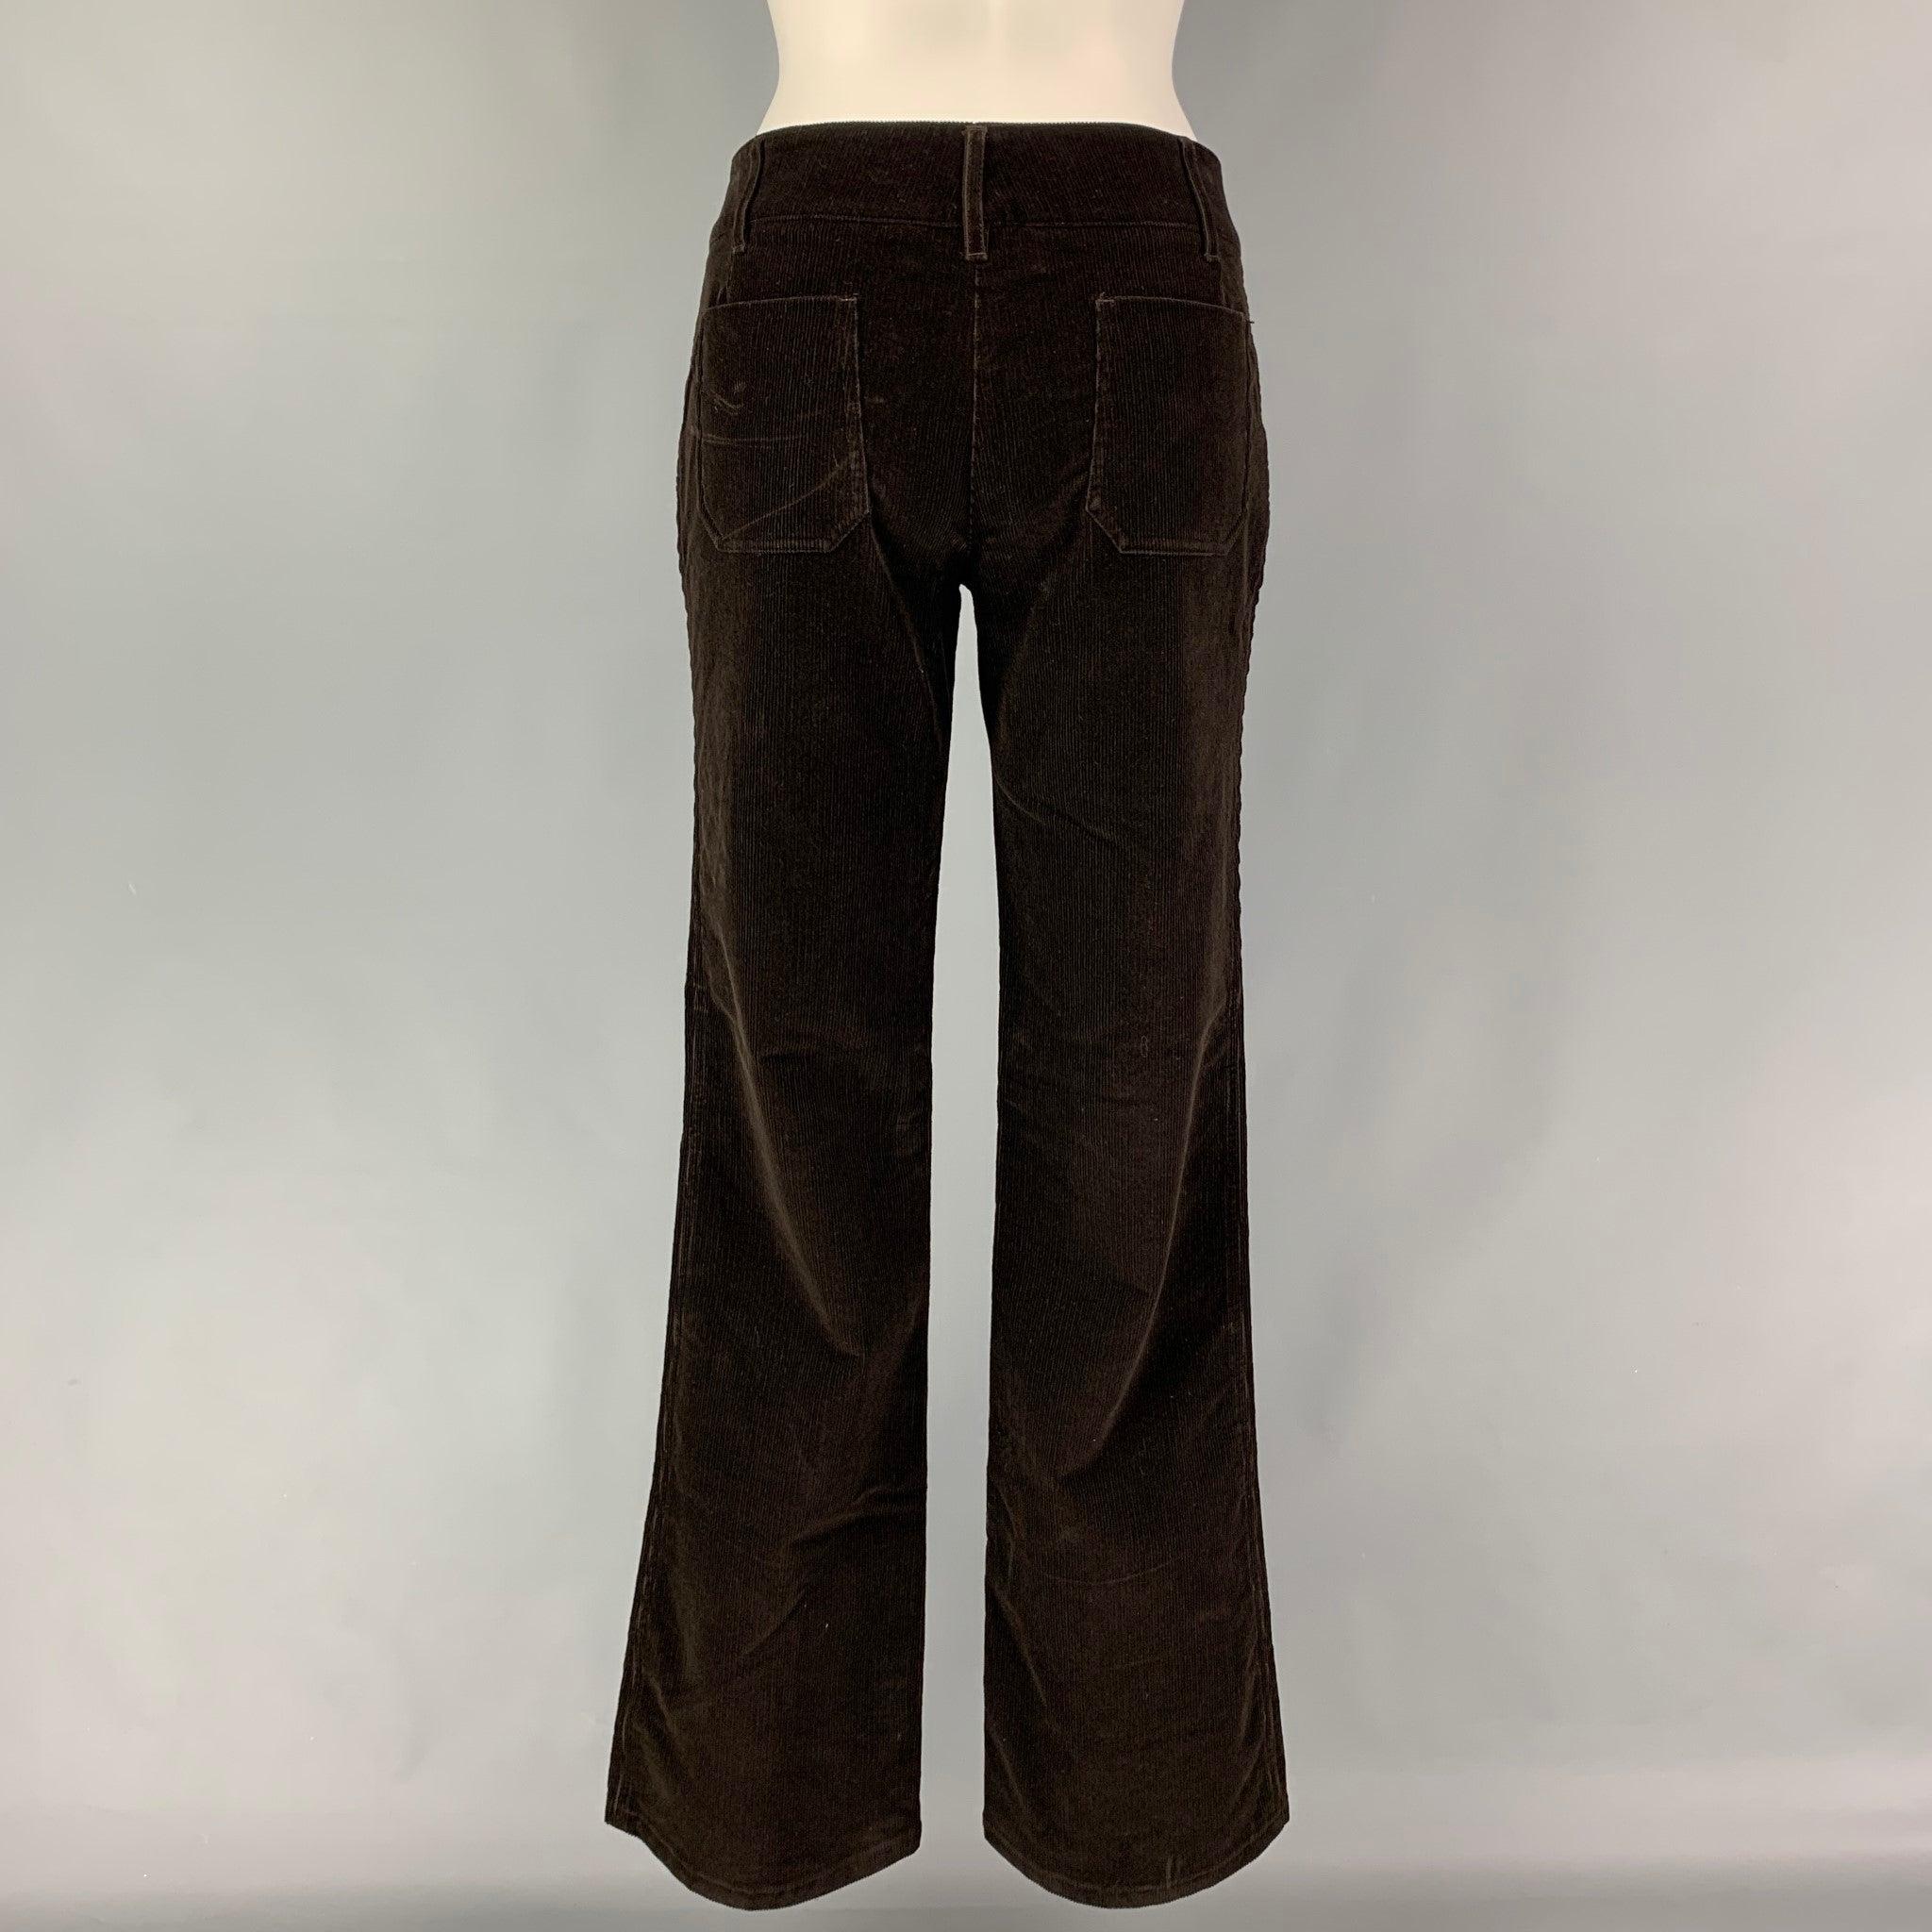 PRADA casual pants comes in a brown corduroy featuring a flat front and a button fly closure. Made in Italy.
Very Good
Pre-Owned Condition. 

Marked:   42 

Measurements: 
  Waist: 32 inches  Rise: 9 inches  Inseam: 34 inches 
  
  
 
Reference: